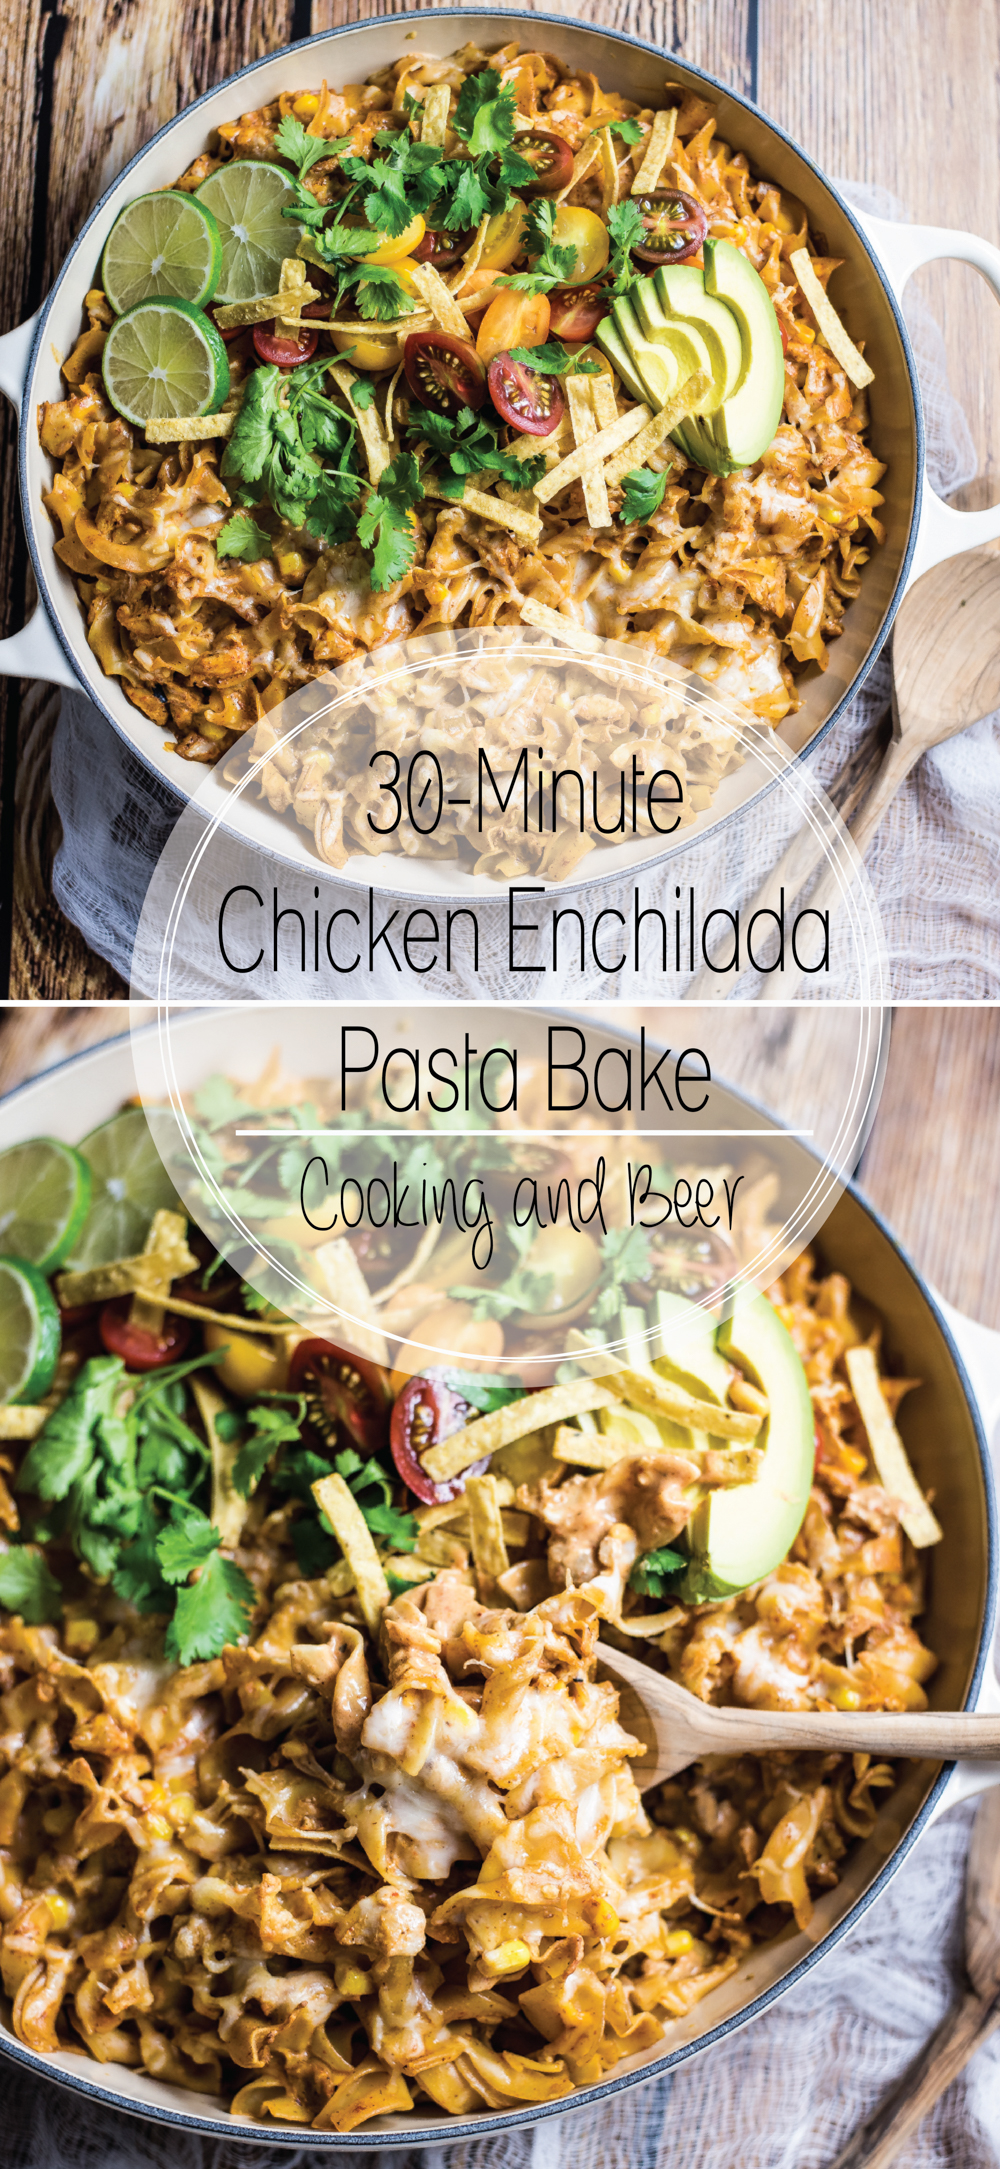 30 Minute Chicken Enchilada Pasta Bake is the perfect easy weeknight meal that's loaded with flavor and ready in under 30 minutes!